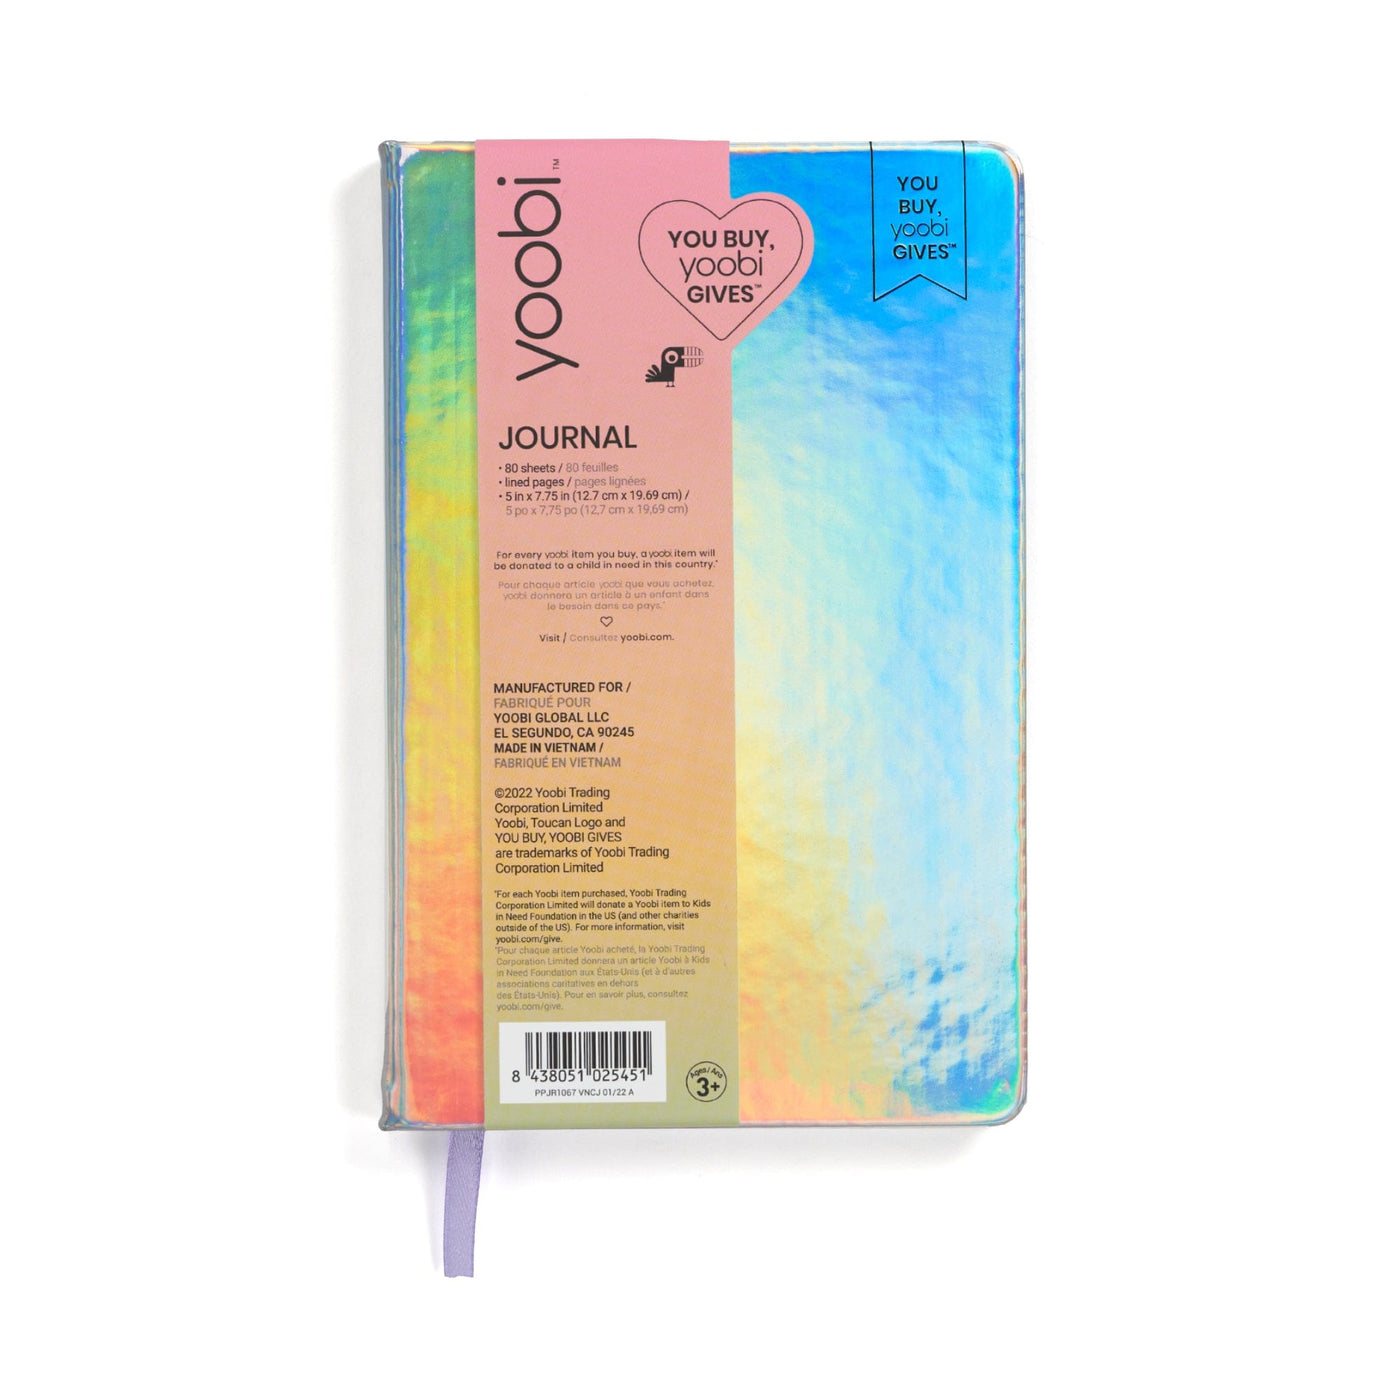 Holographic journal shown with Yoobi packaging label